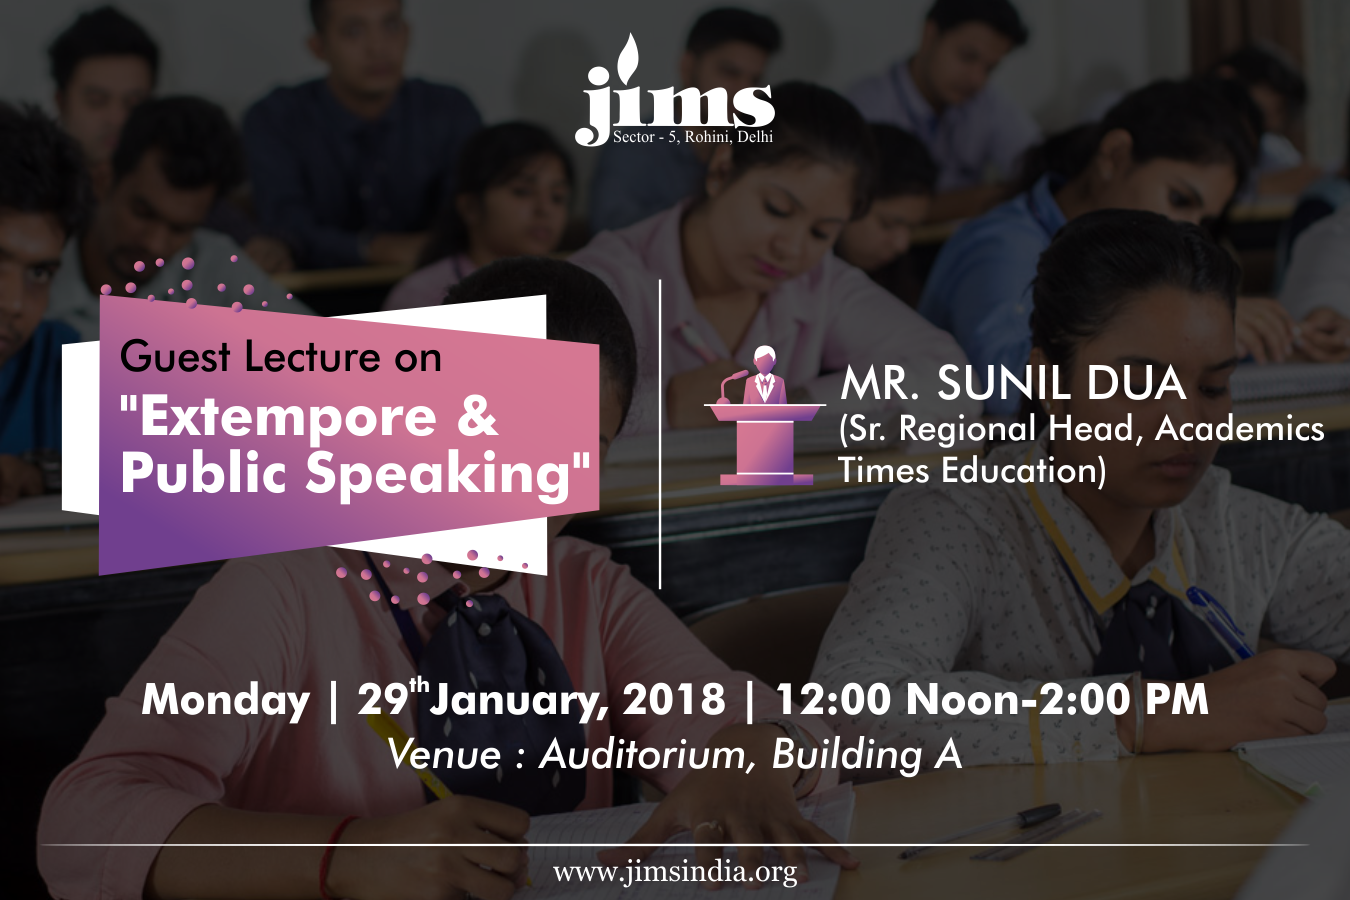 JIMS is organizing a guest lecture session on Extempore and Public Speaking